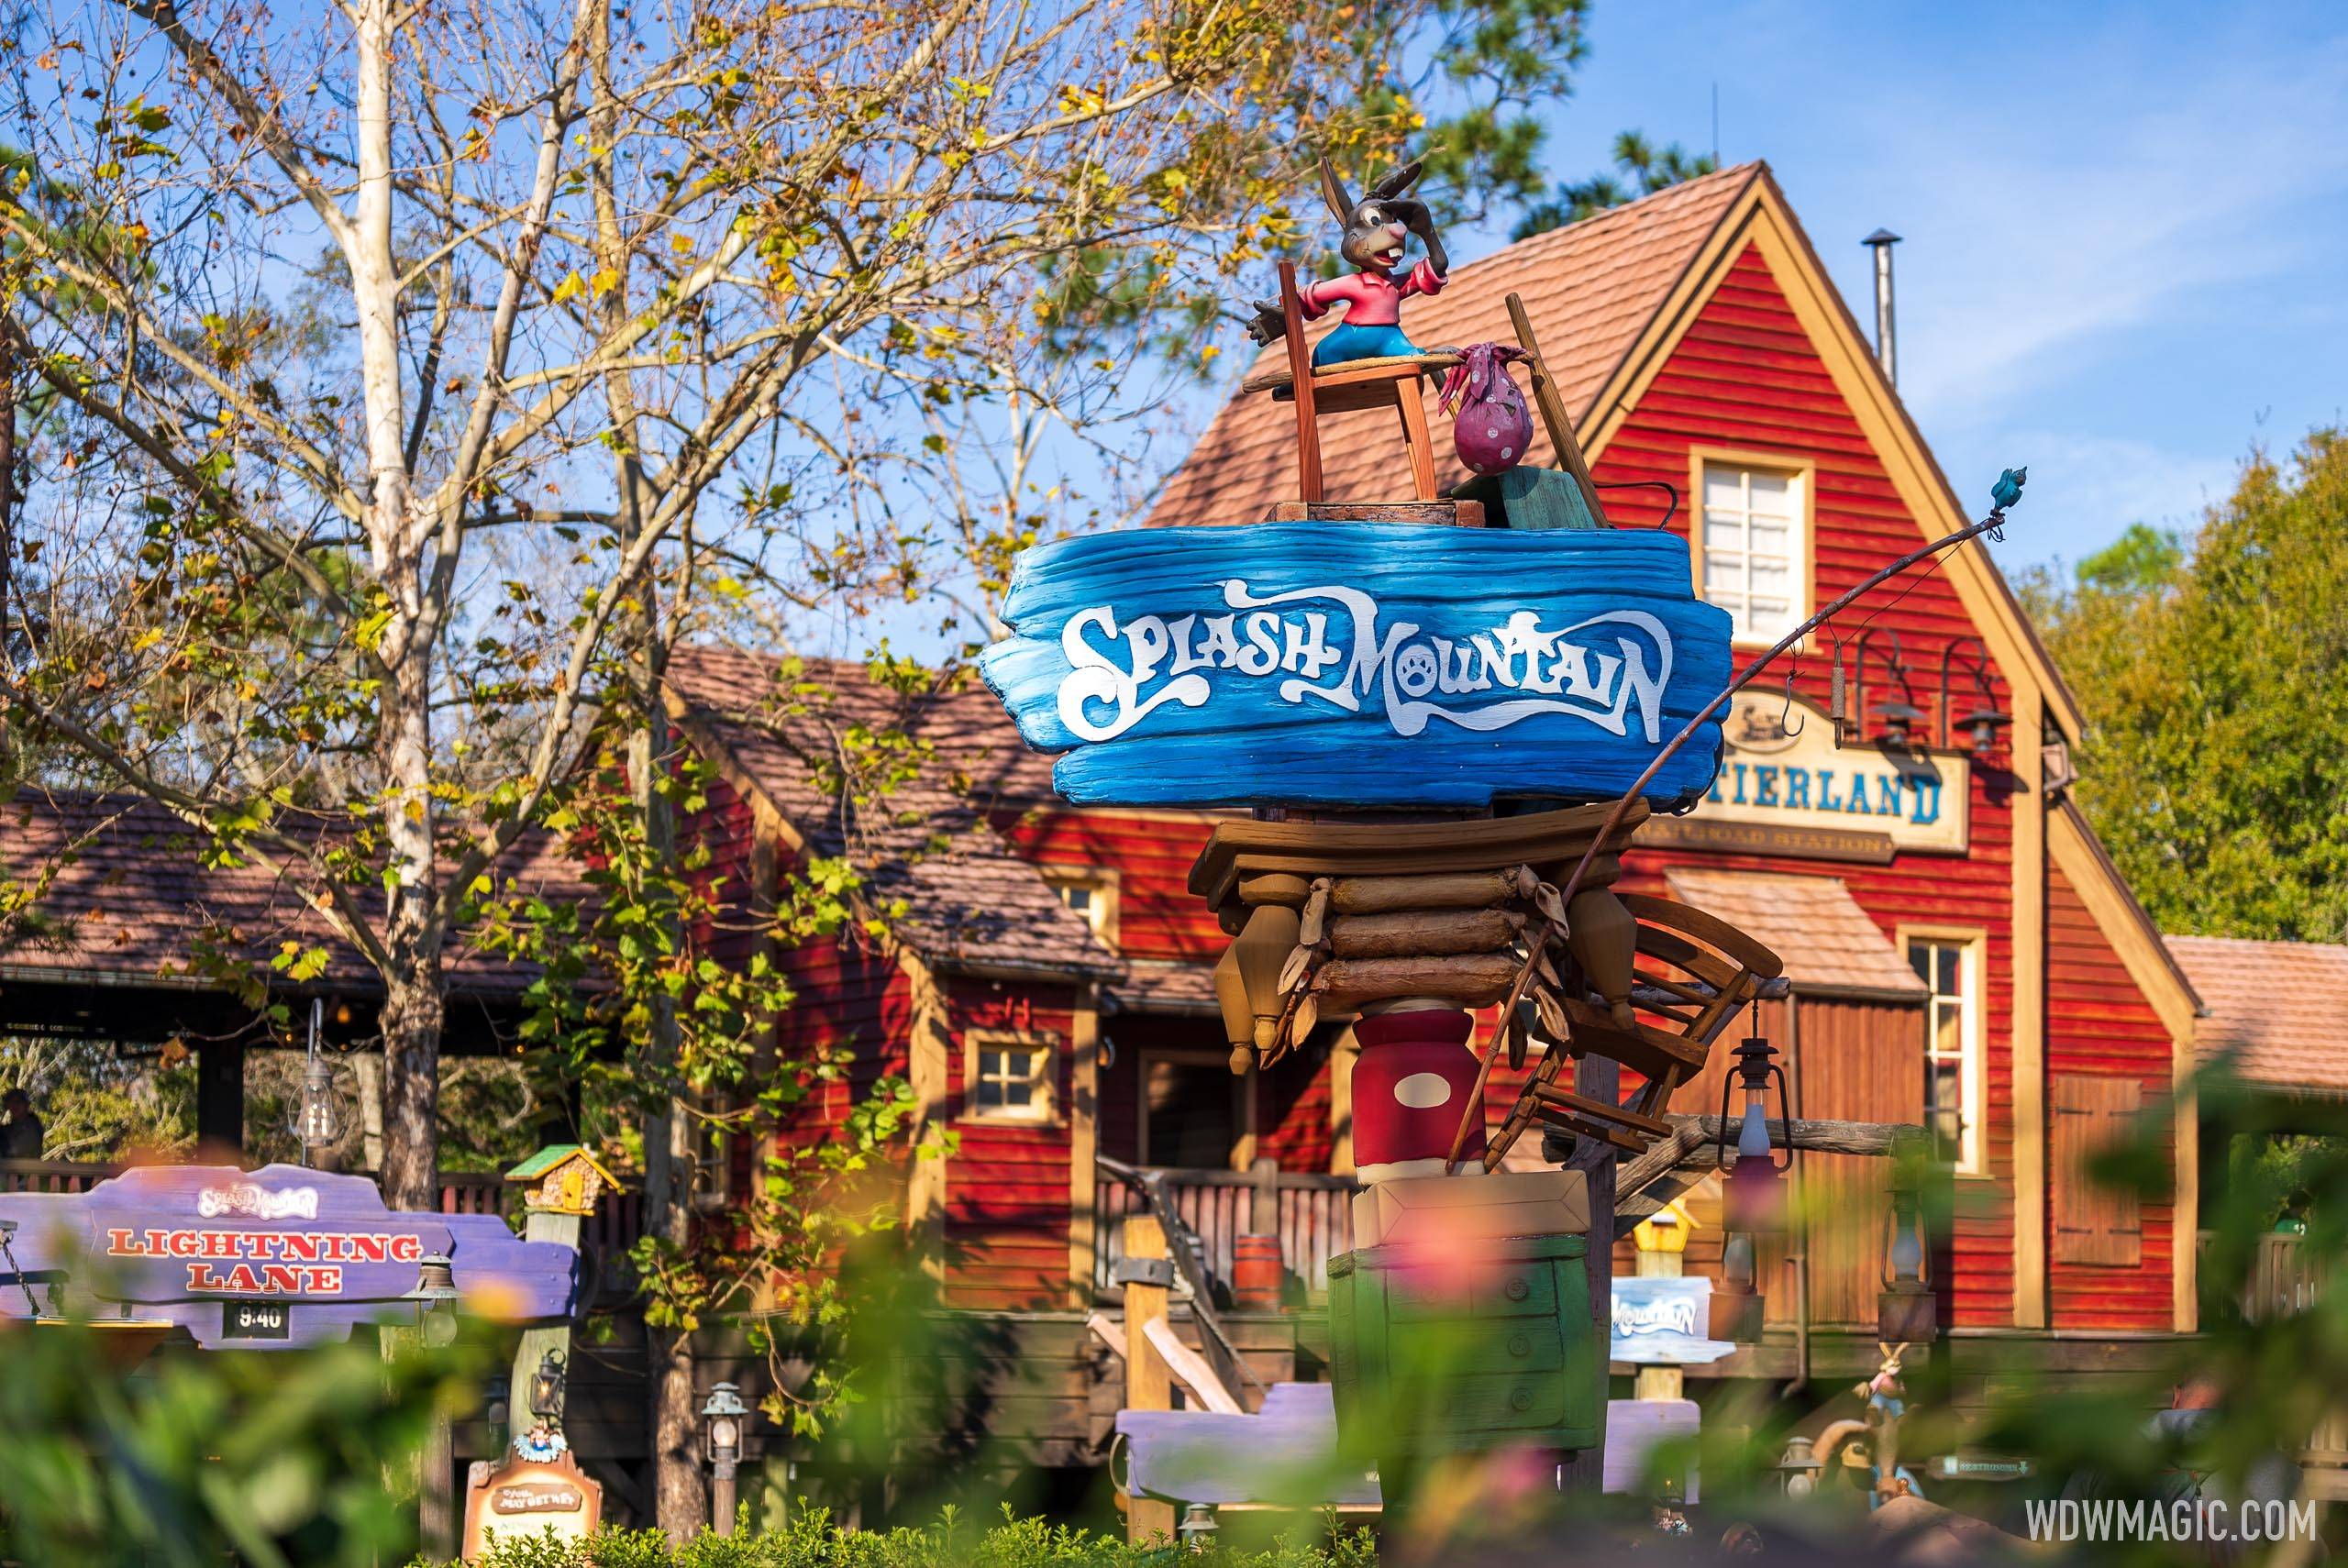 Splash Mountain will close at the end of operations on January 22 2023